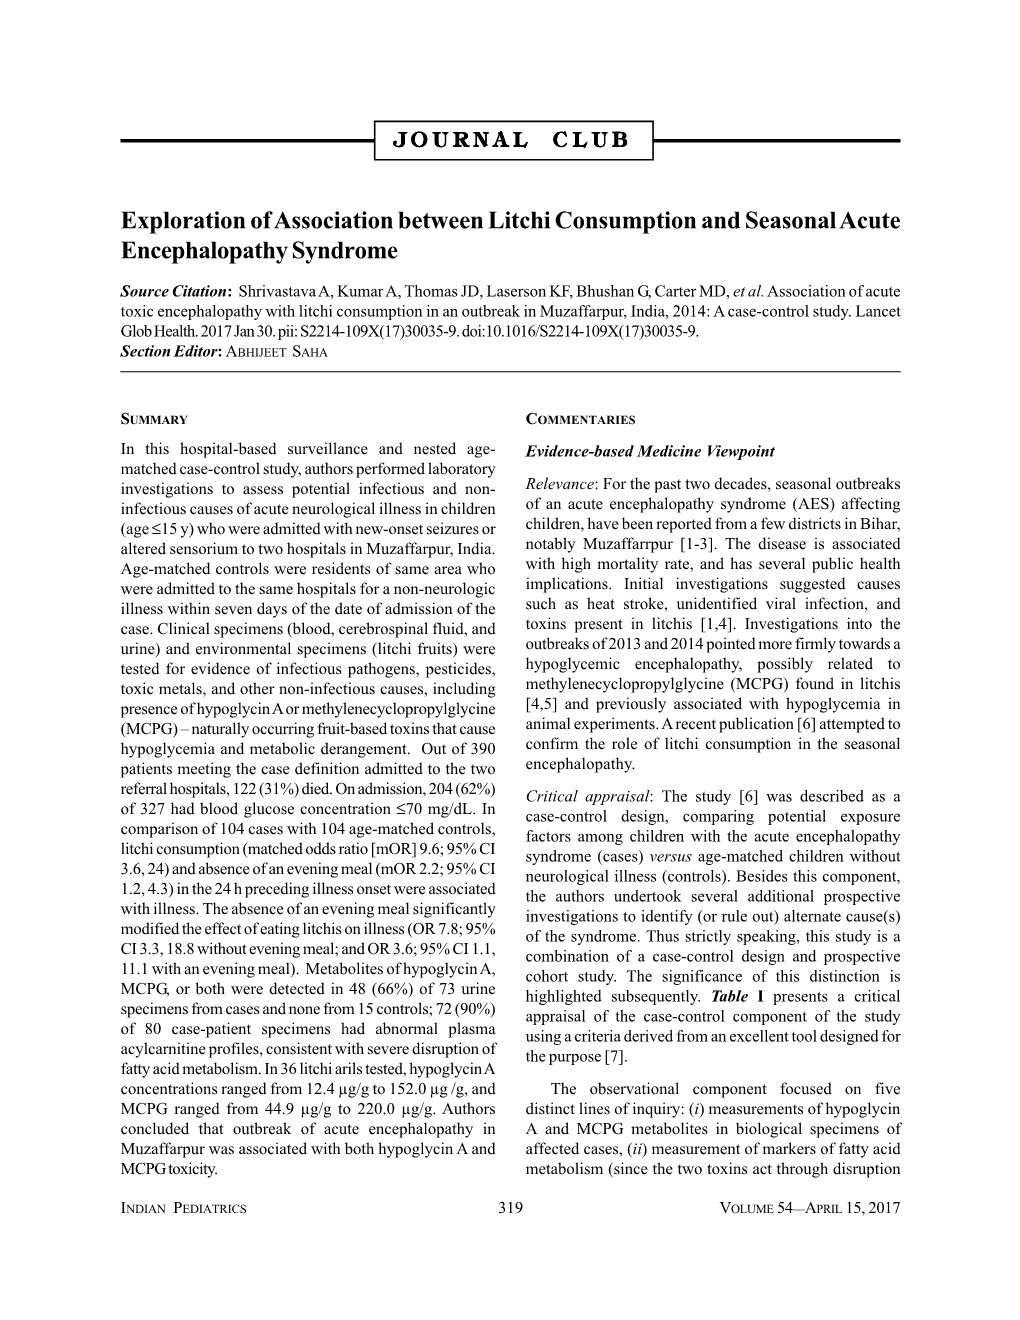 Exploration of Association Between Litchi Consumption and Seasonal Acute Encephalopathy Syndrome